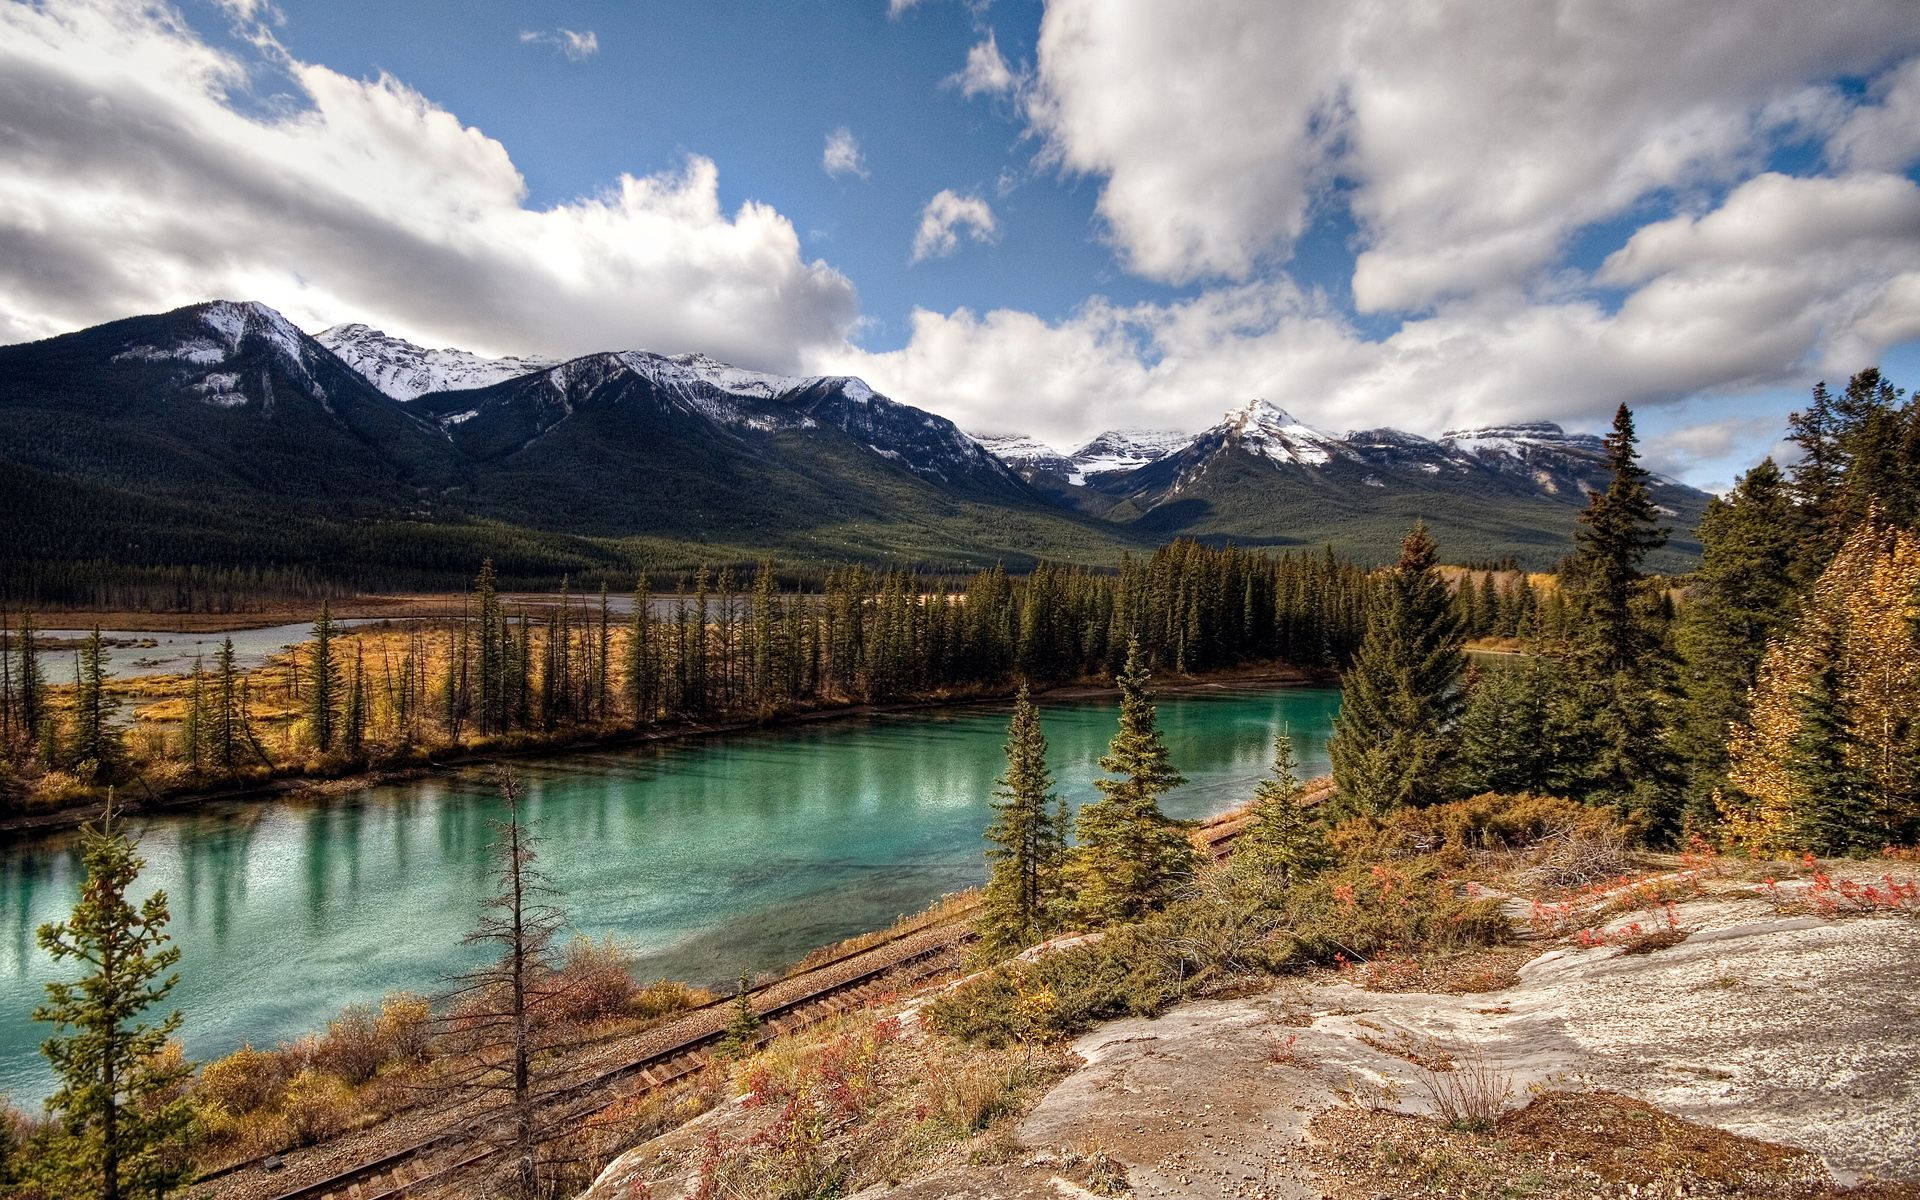 A breathtaking view of the snow-capped mountains in Banff National Park - Wallpaper